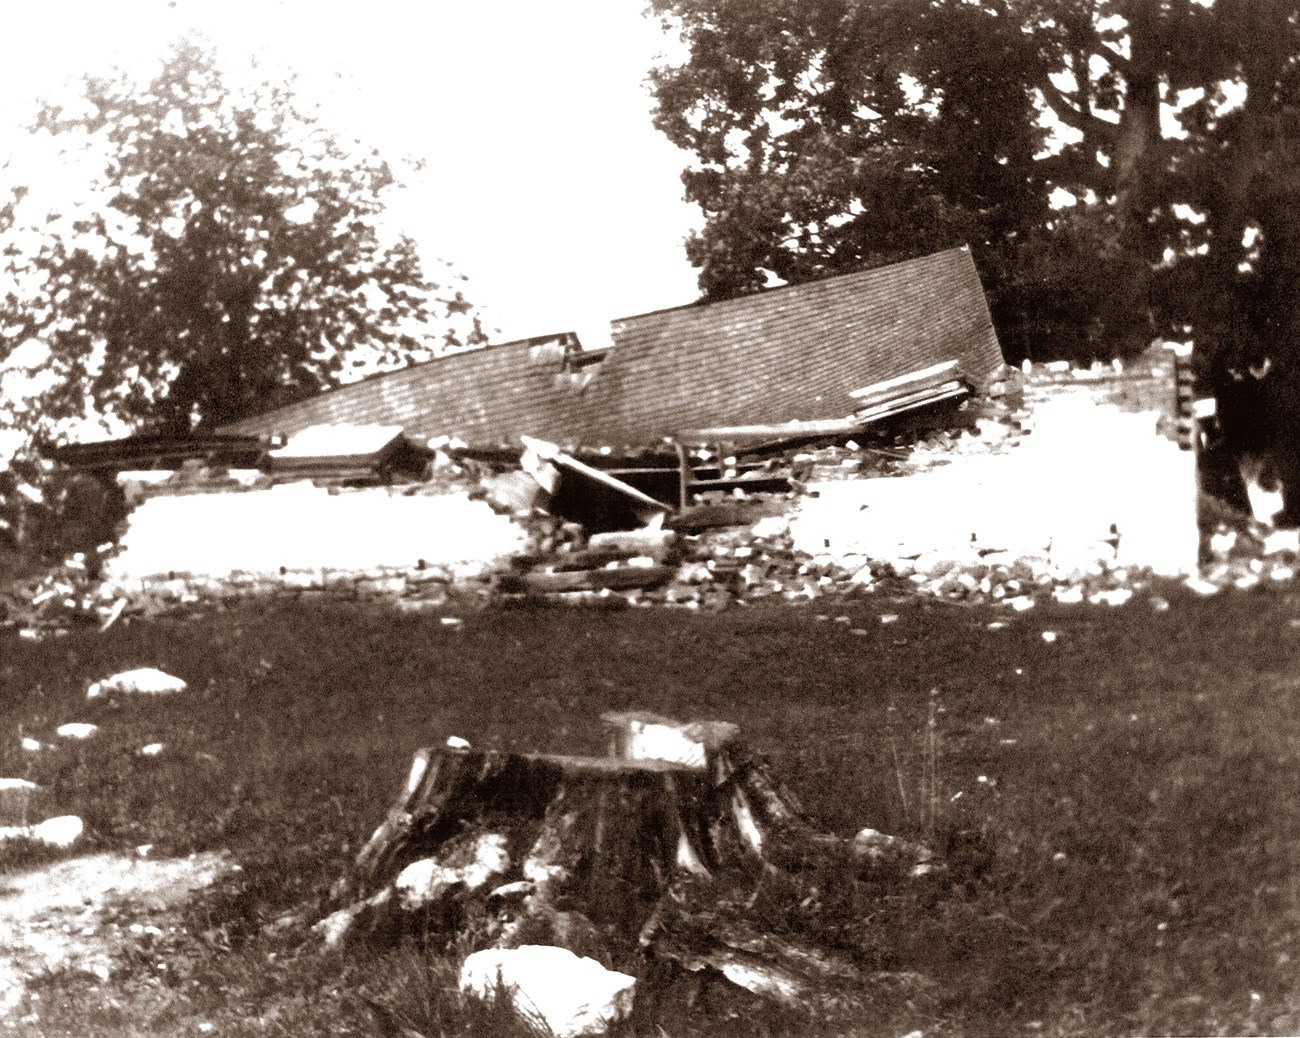 Dunker Church was destroyed in 1921